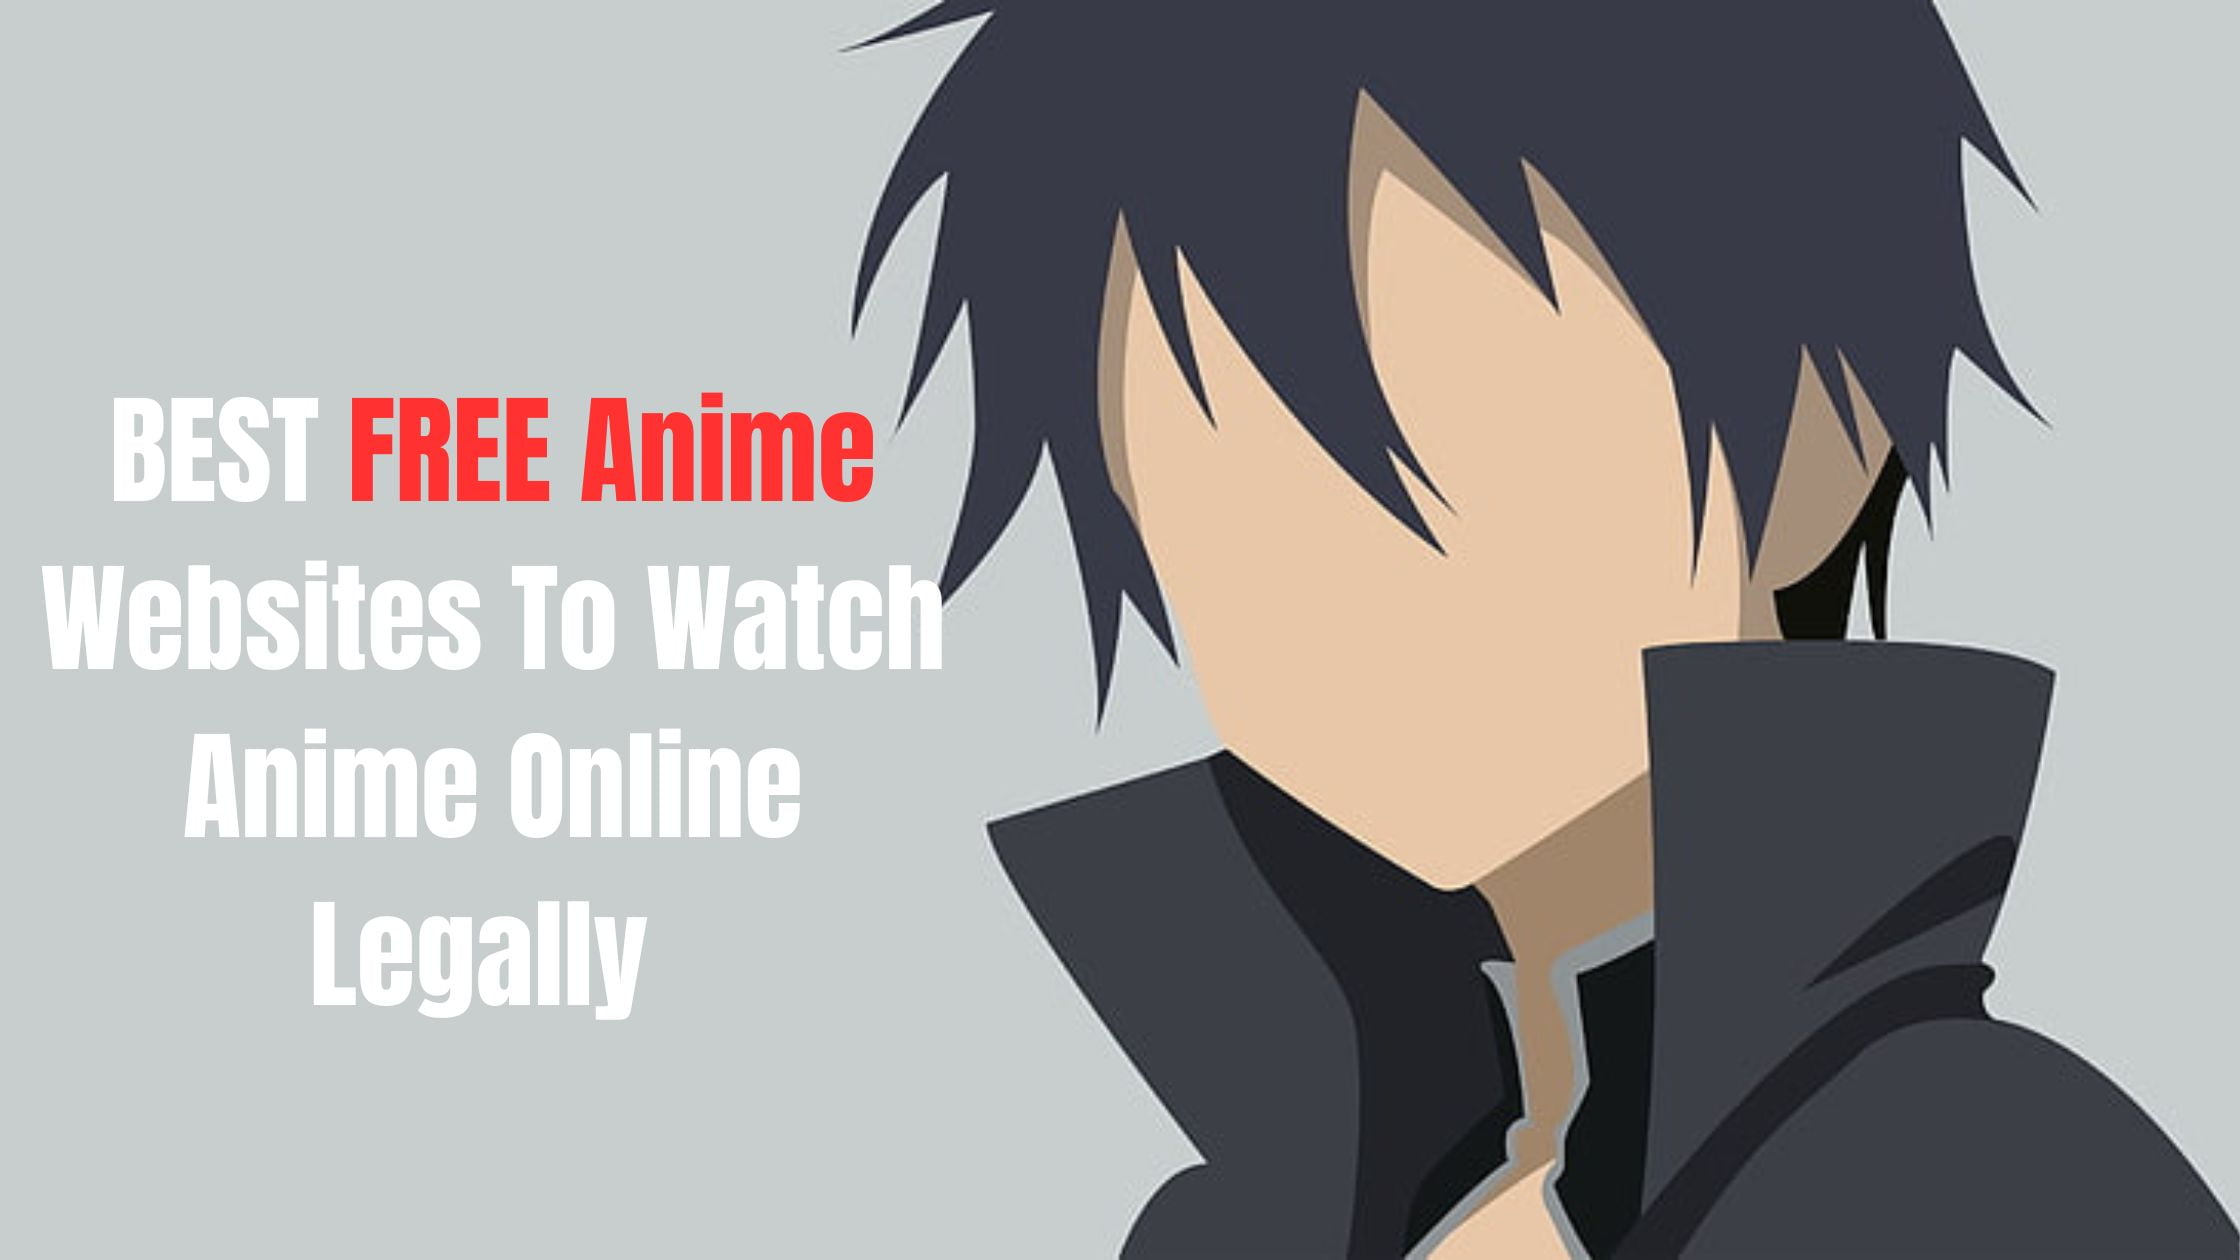 BEST FREE Anime Websites To Watch Anime Online Legally 